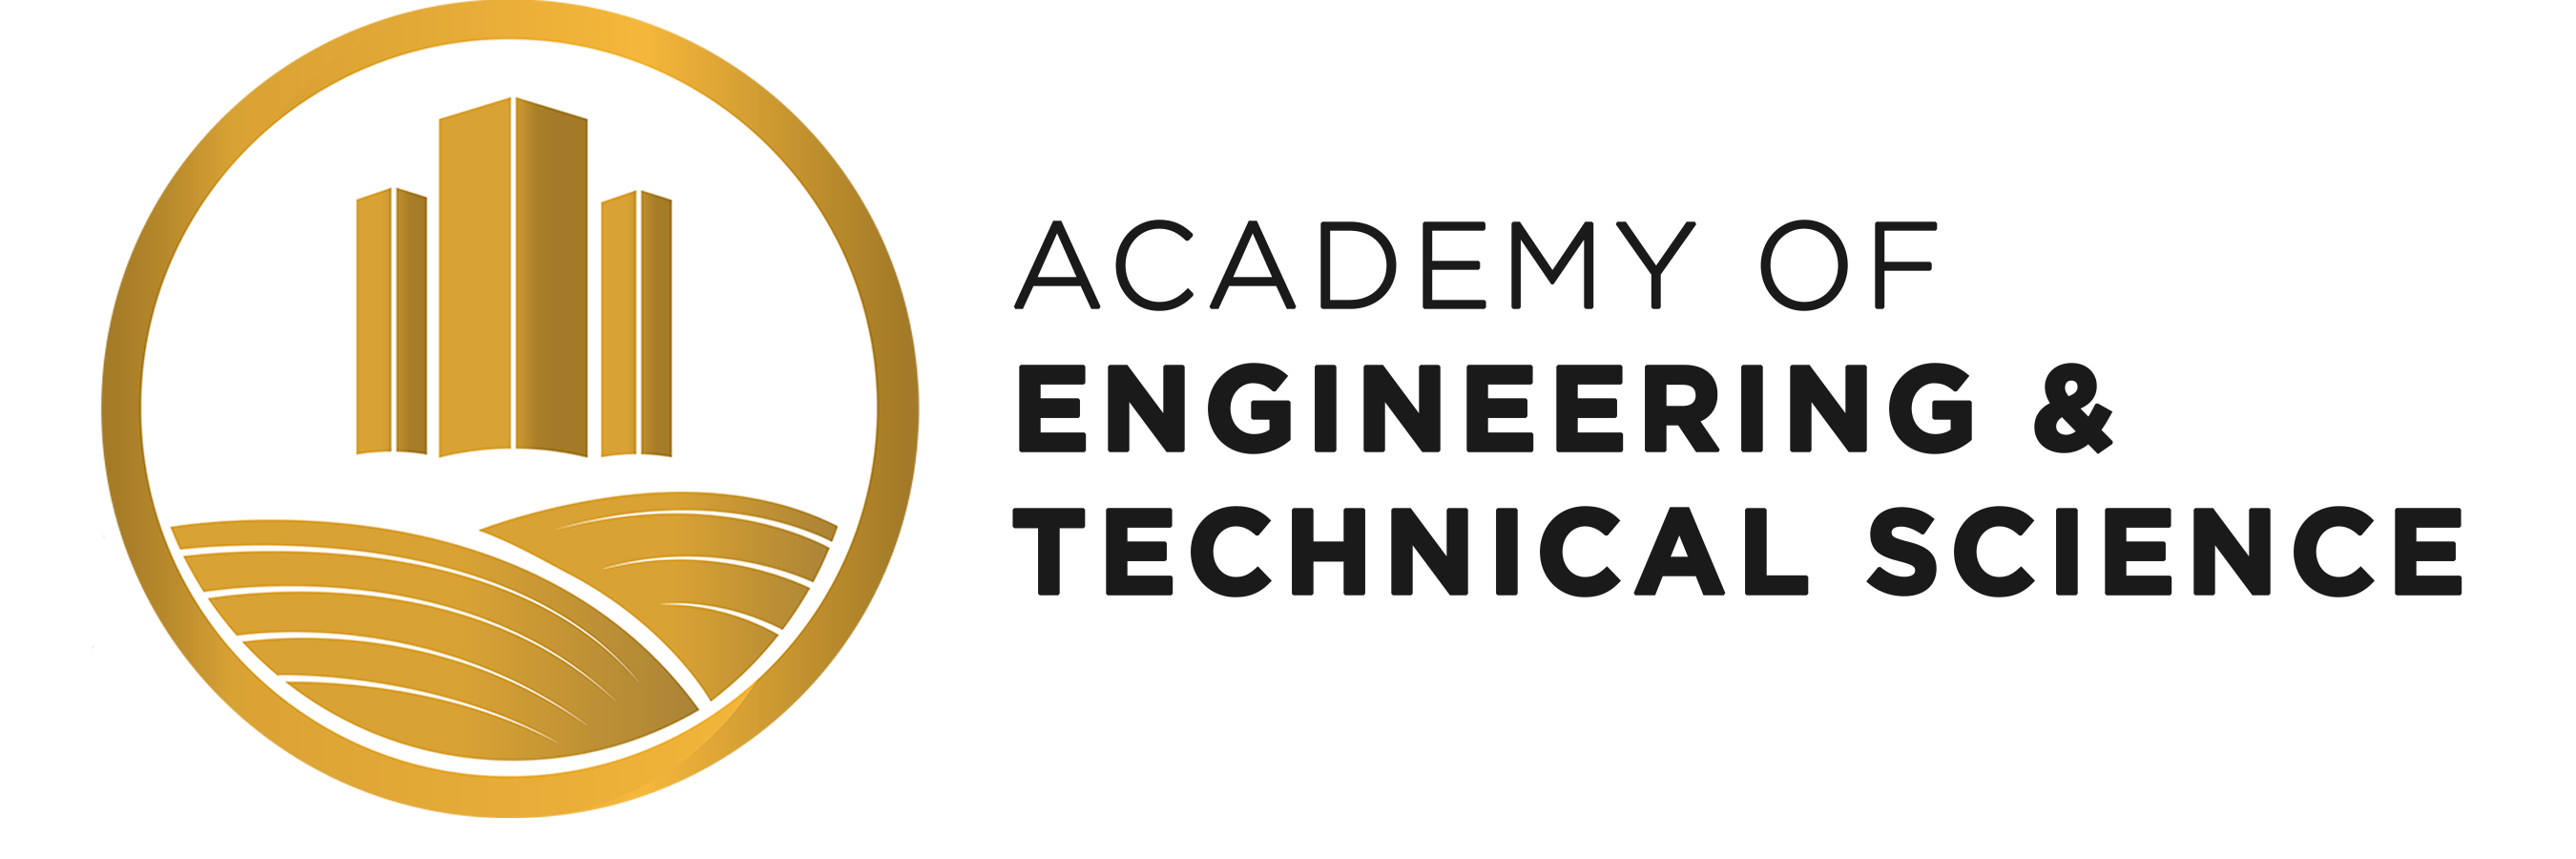 Engineering & Technical Science